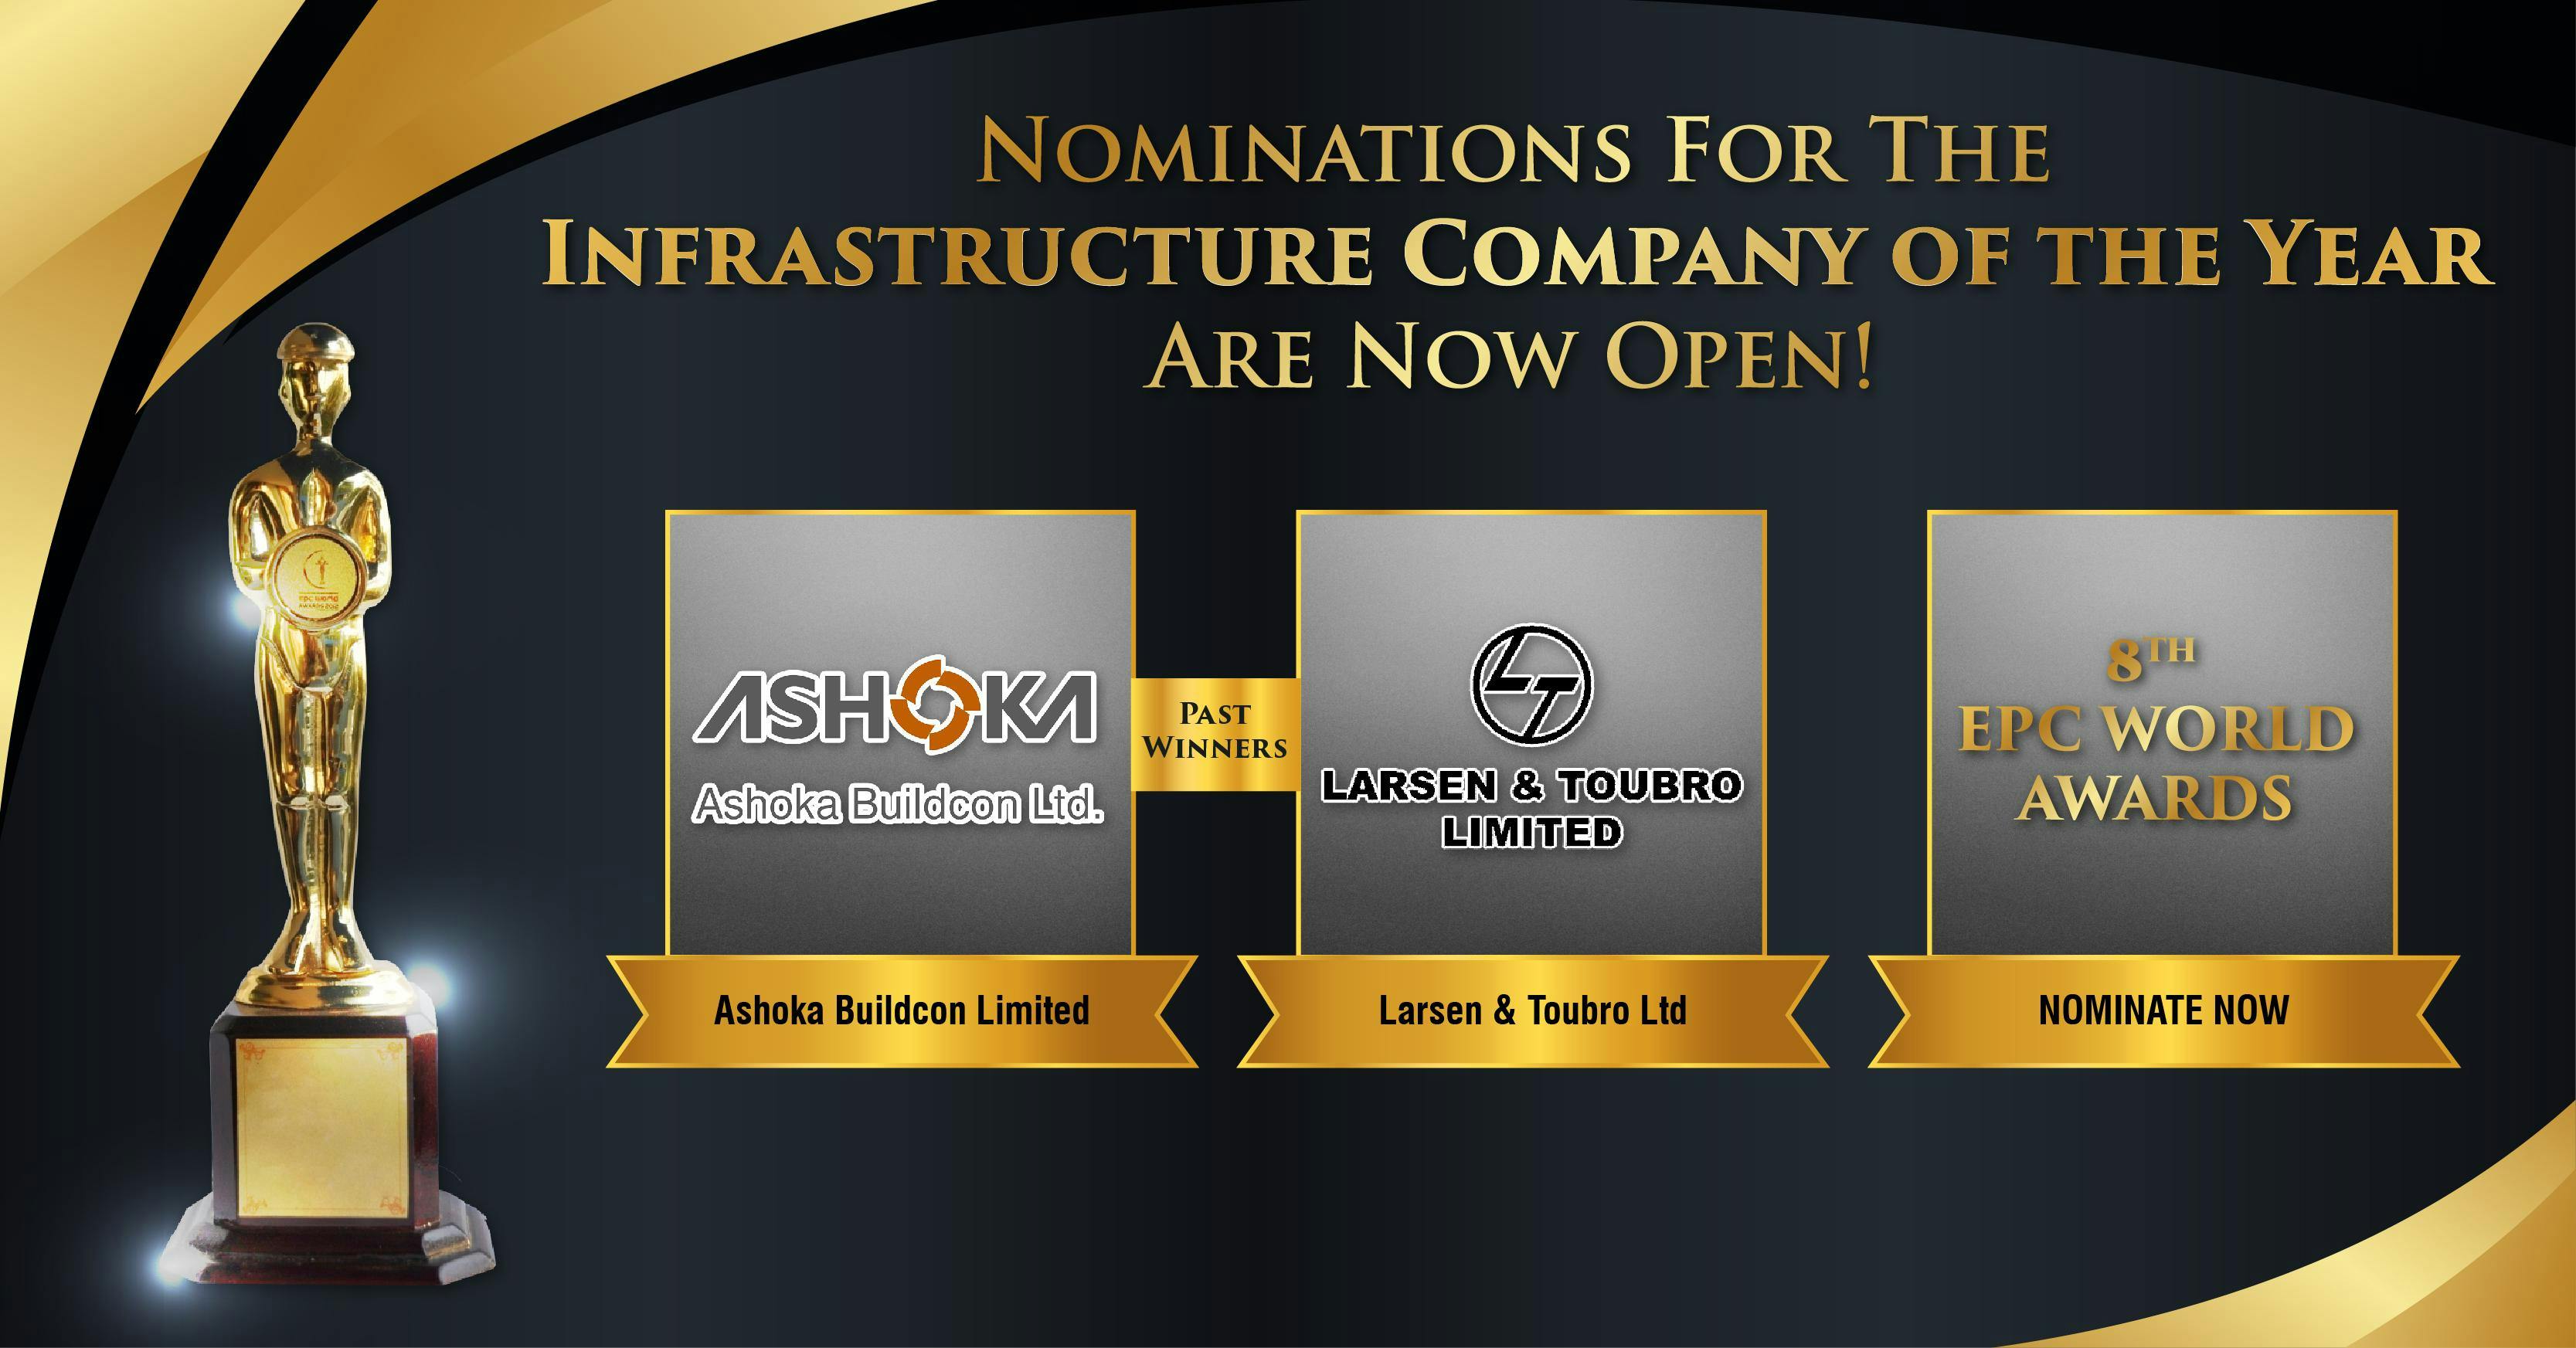 Nominations For The Infrastructure Company Of The Year Are Now Open! 